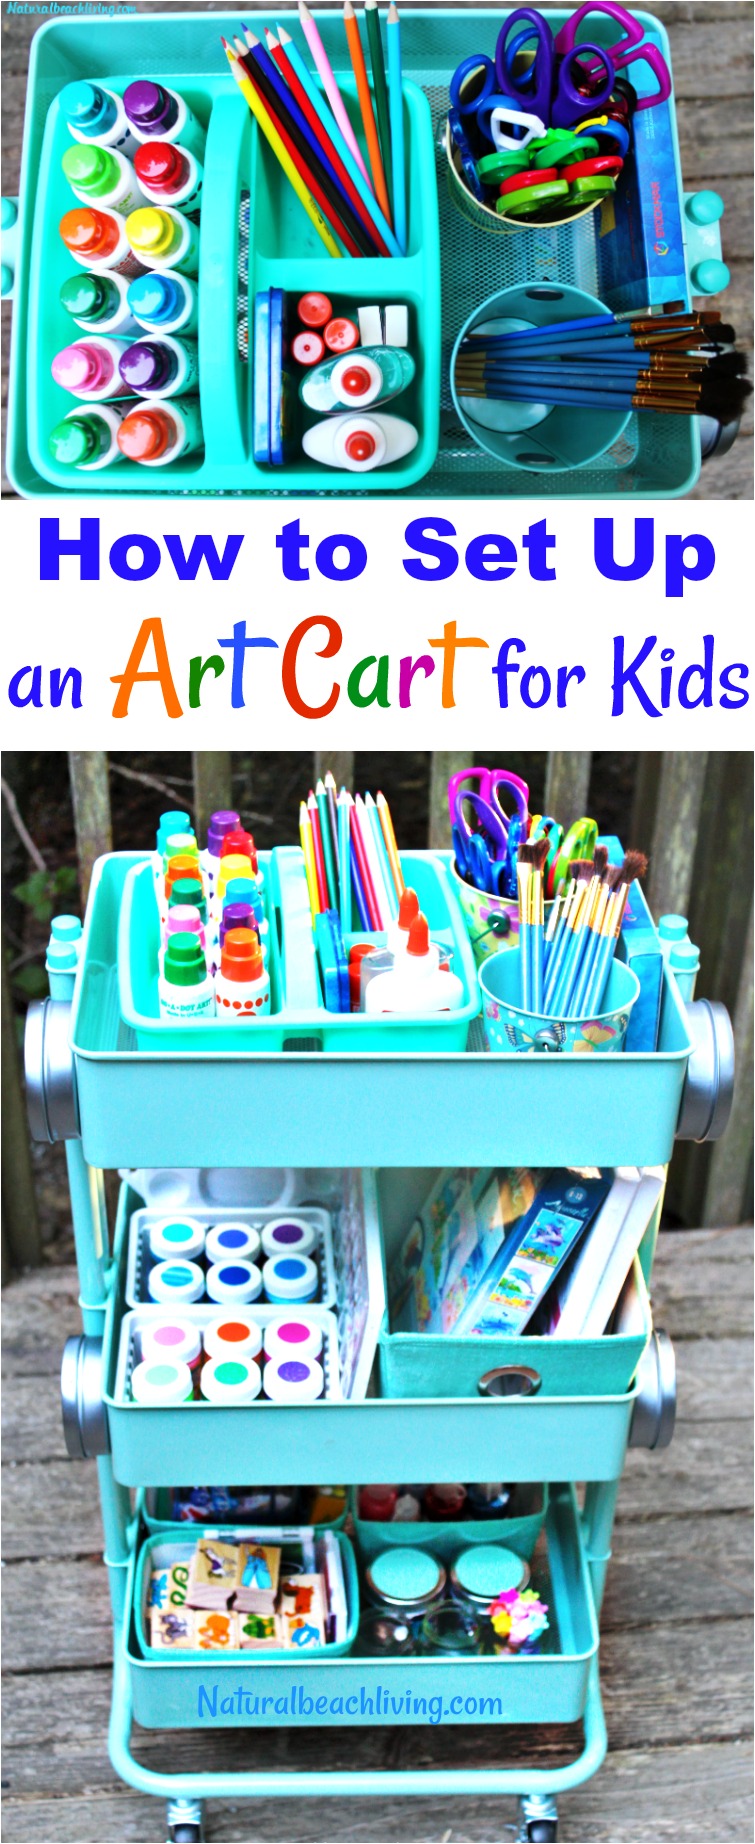 How to set up an art cart for kids, This February Drawing Challenge is perfect for kids and adults. Draw or Doodle through the month of February. This Challenge is full of February themes and topics like strawberries, football, Valentines, birds, love and more. Get ready to relax, find joy in each thing, and get your creativity flowing.